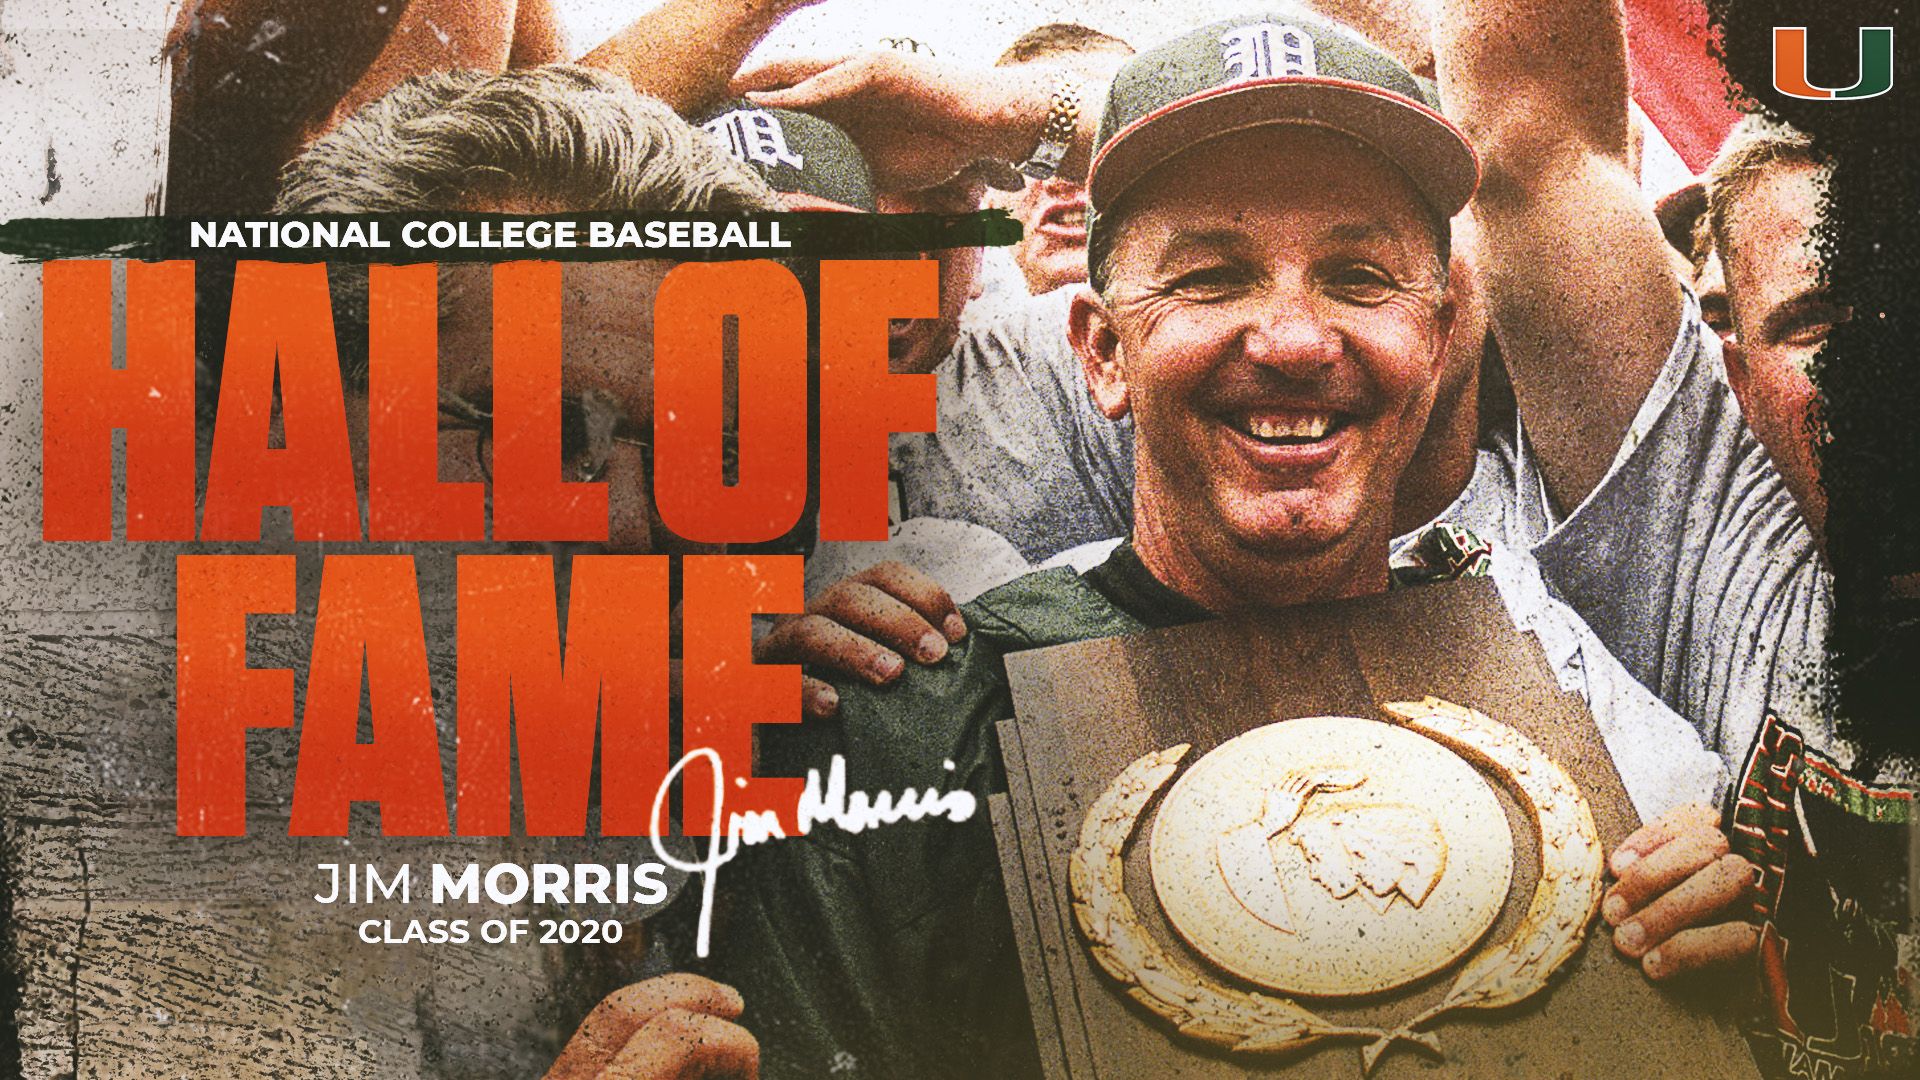 What They're Saying: Jim Morris Elected to National College Baseball Hall of Fame